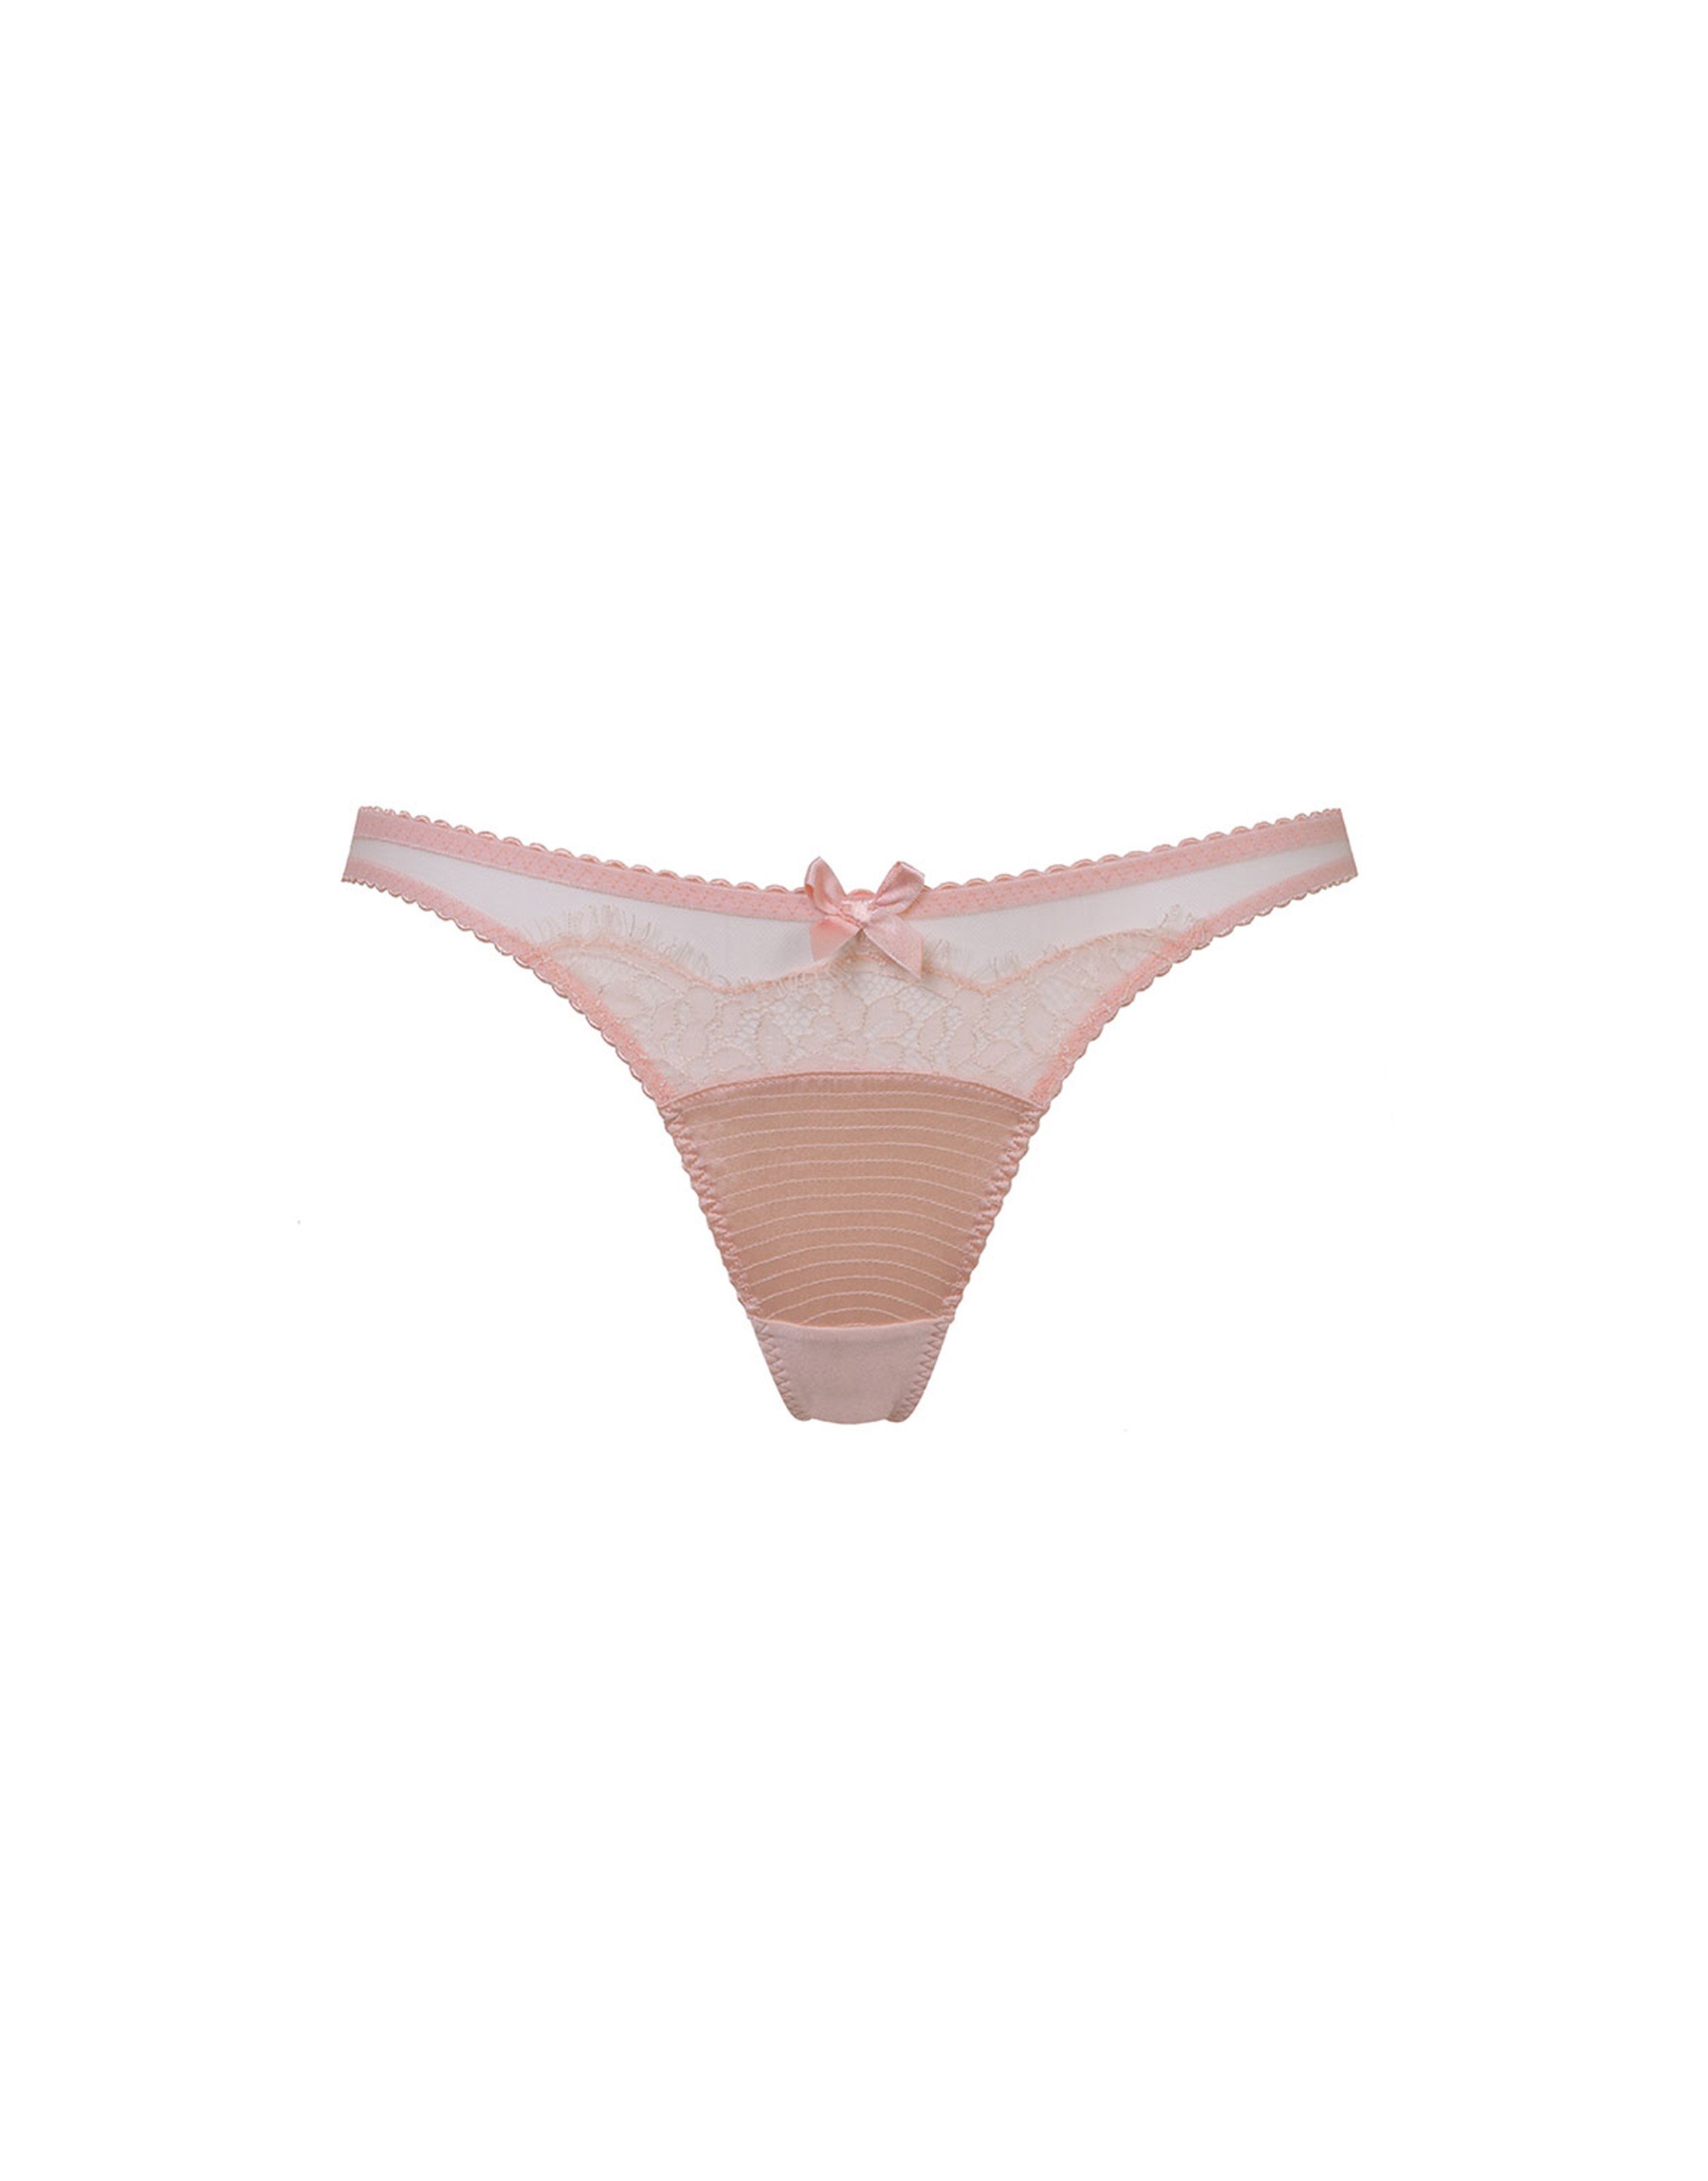 Helene Thong in Blush | Agent Provocateur